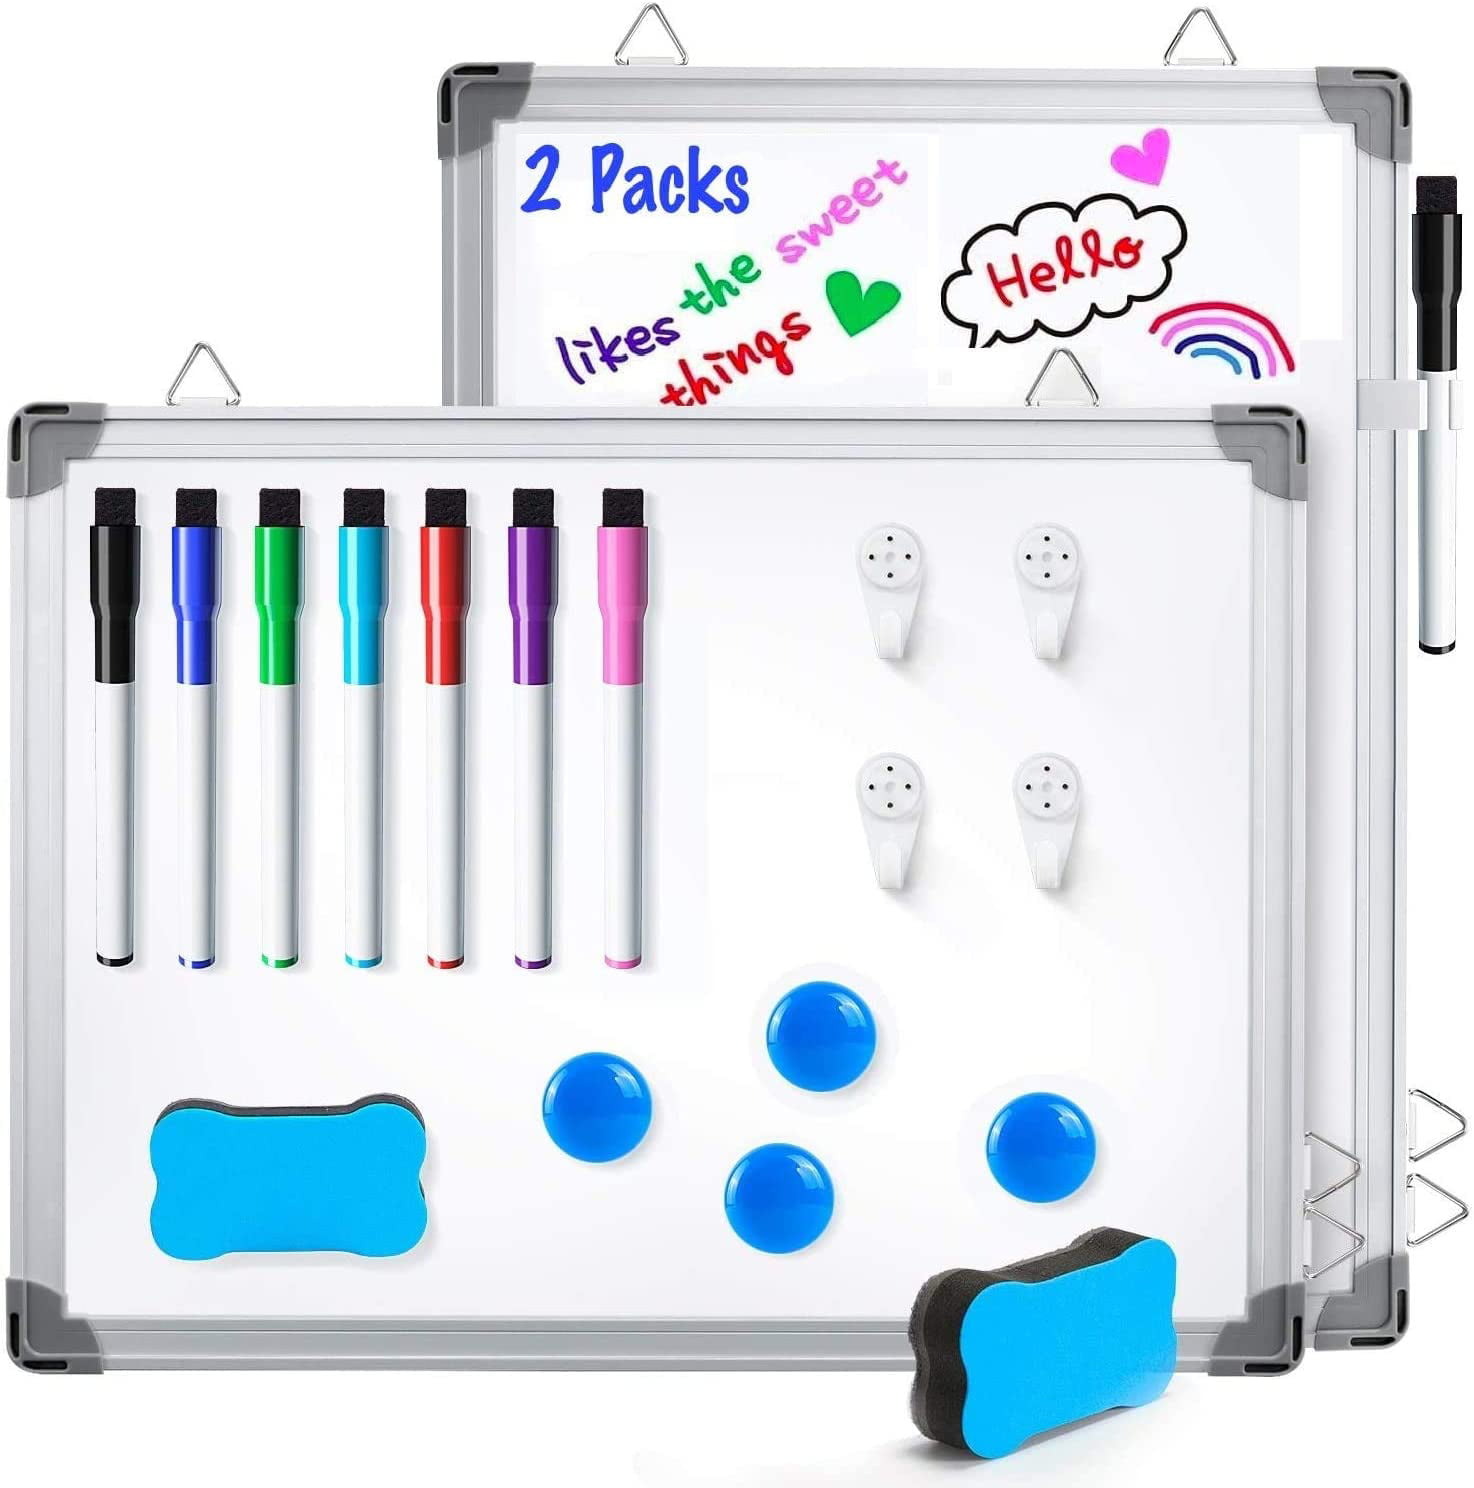 Dry Erase Board for School Glasses 2 Pack 16 x 12 Double Side White Boards BHY Small Dry Erase White Board Magnetic Hanging Whiteboards with 8 Markers Home Office Wall 